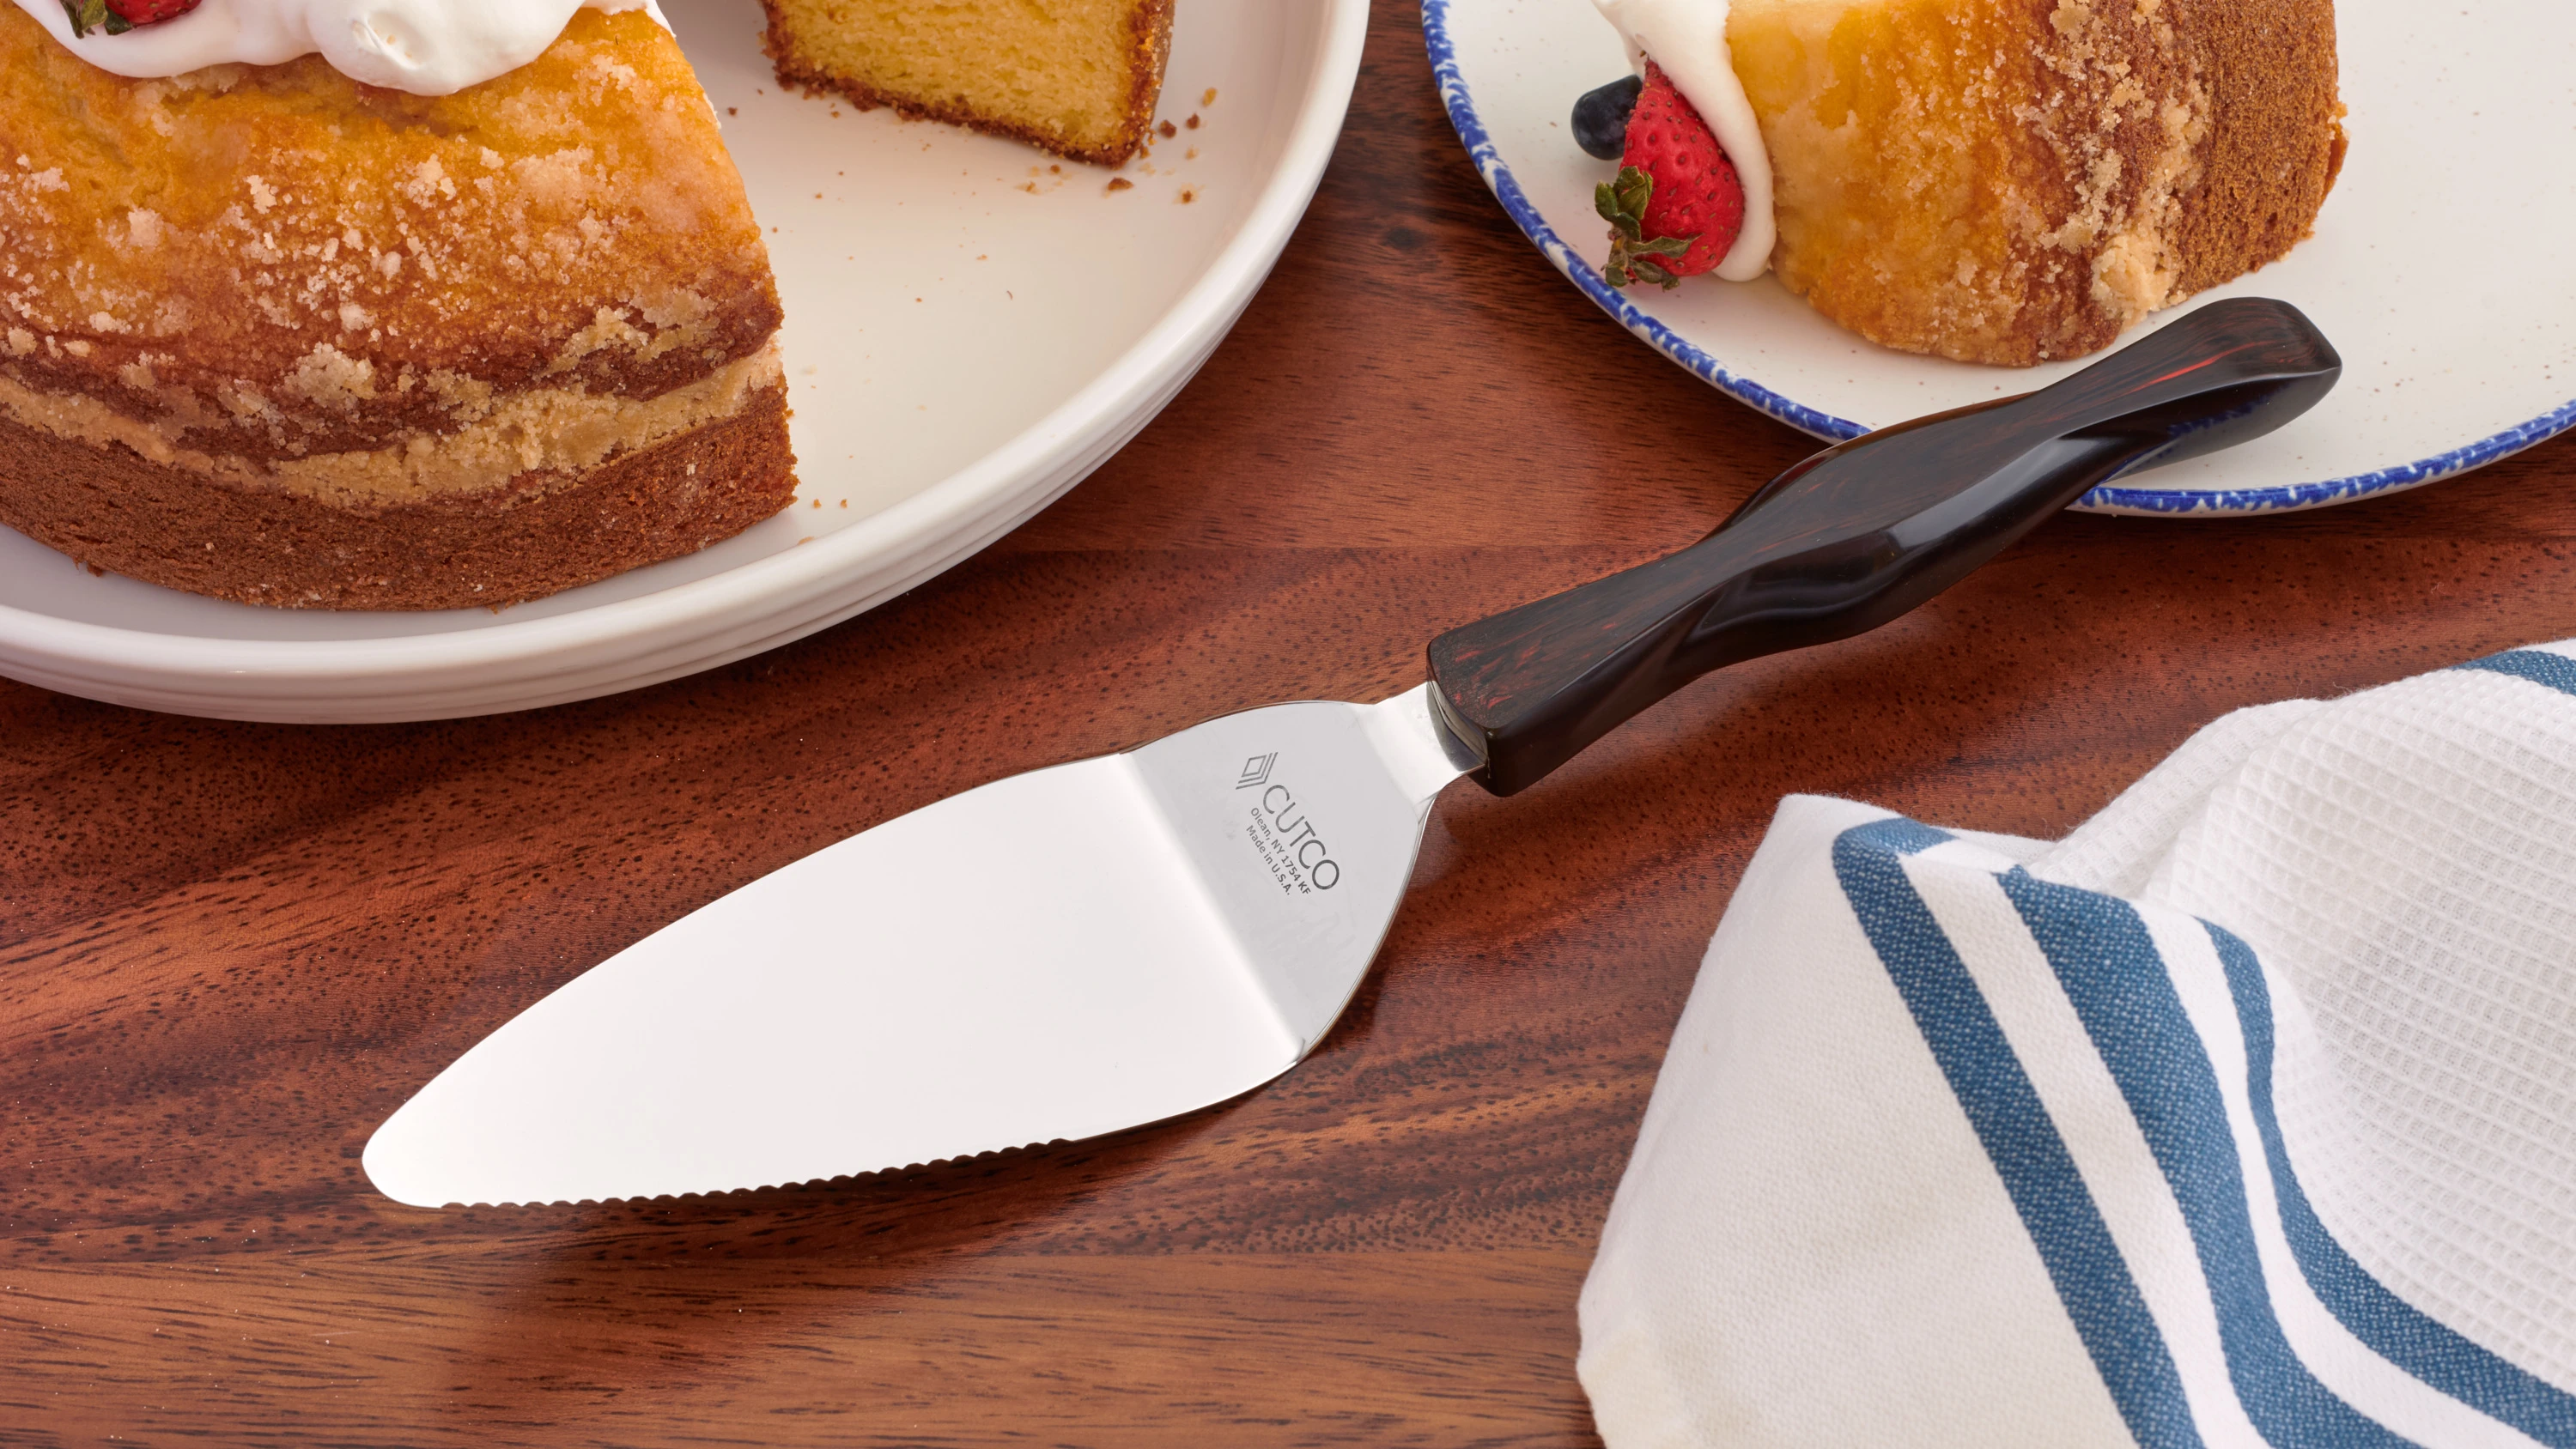 Cutco Cutlery - The Spatula Spreader is the all-in-one tool that